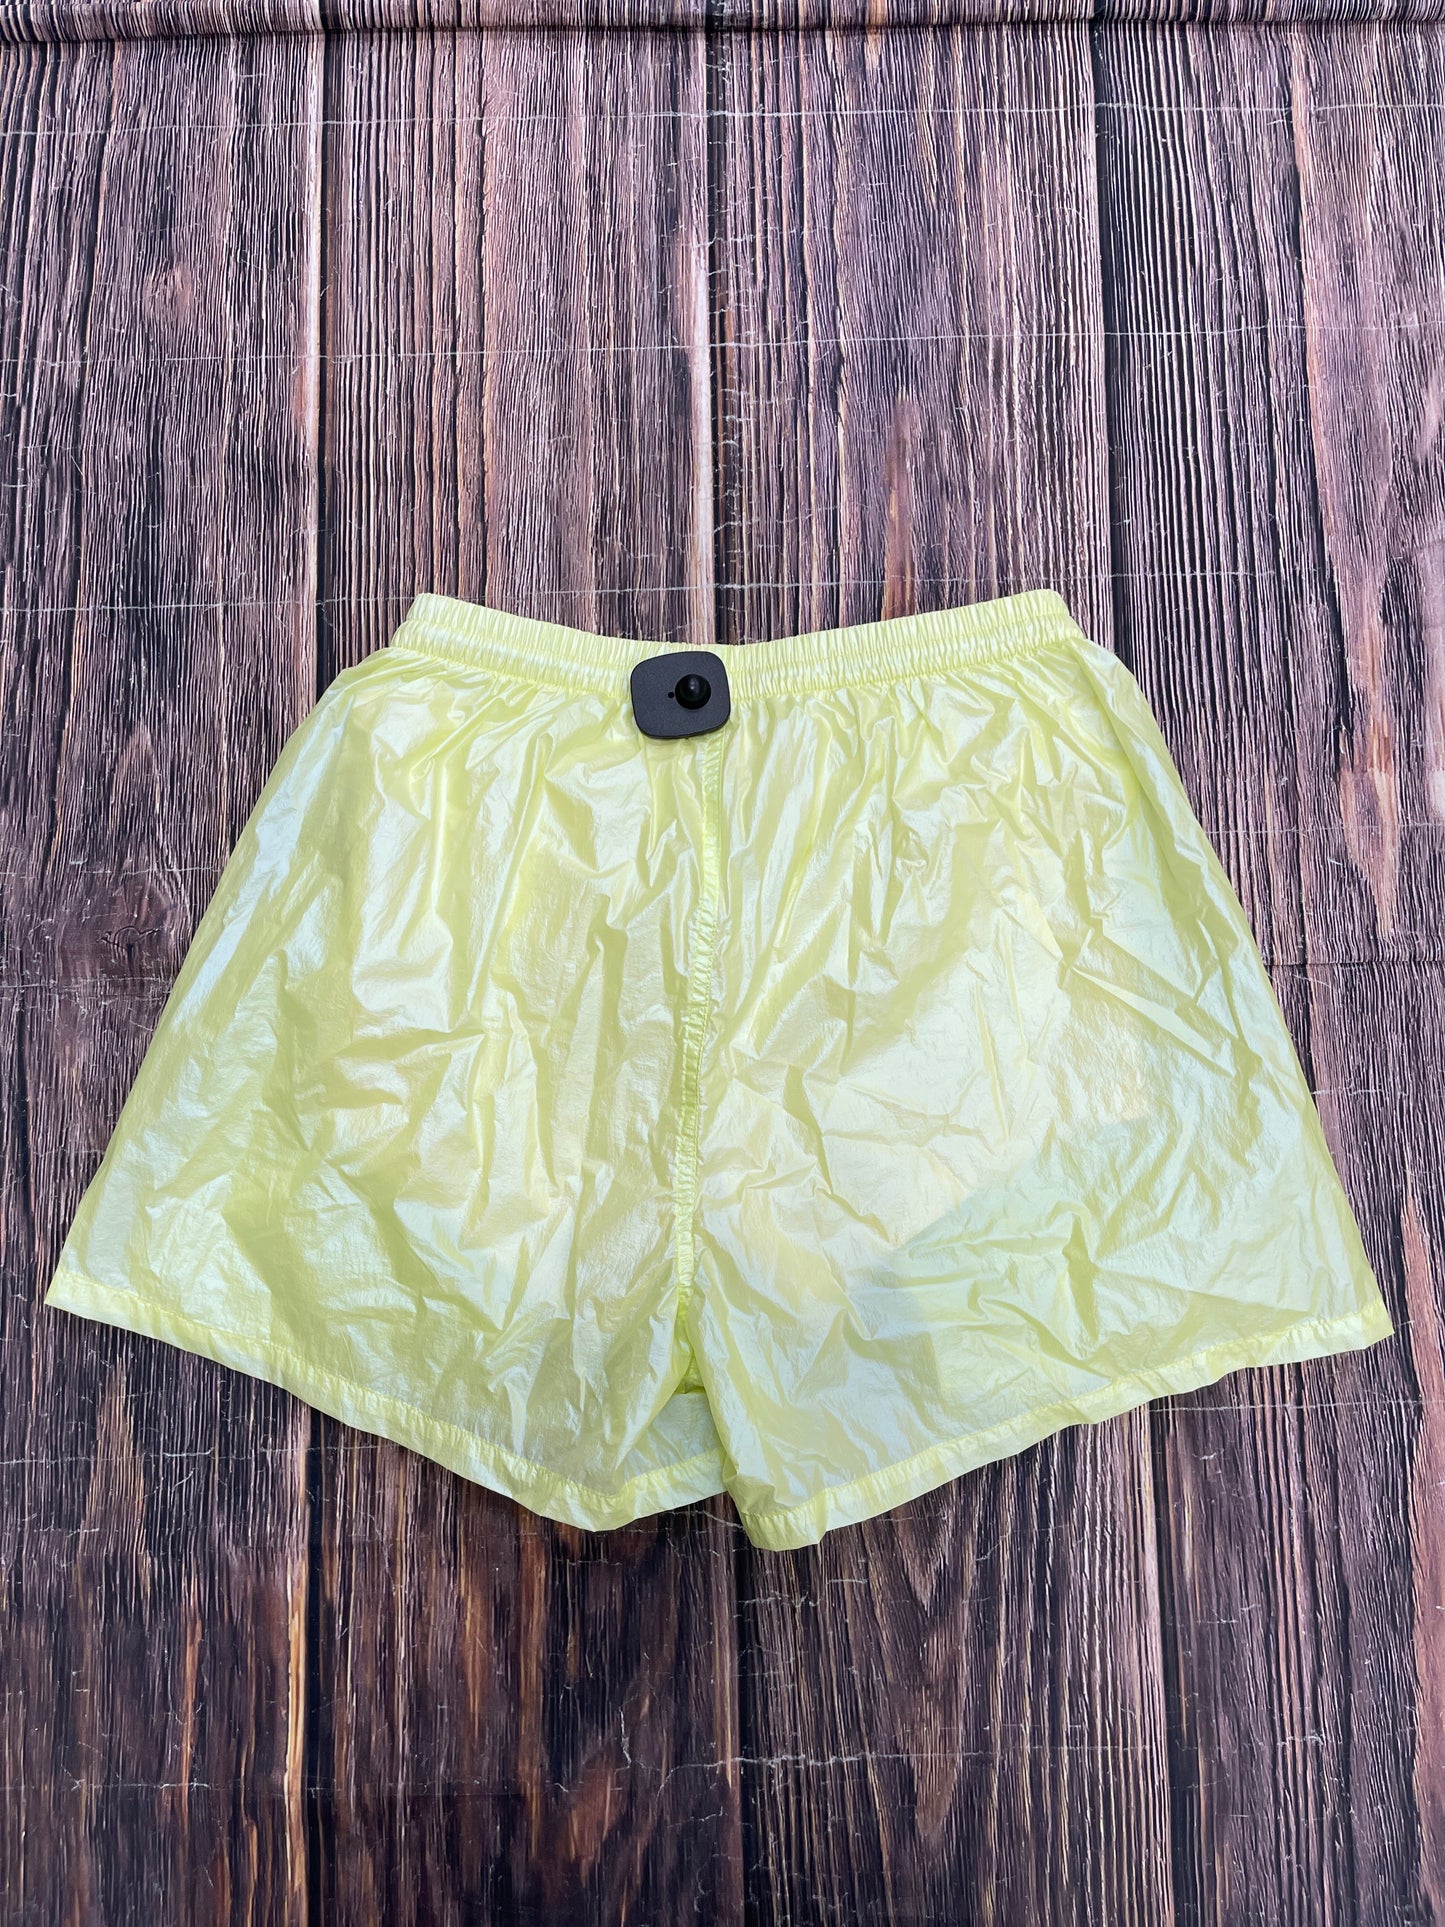 Green Athletic Shorts Tory Burch, Size S